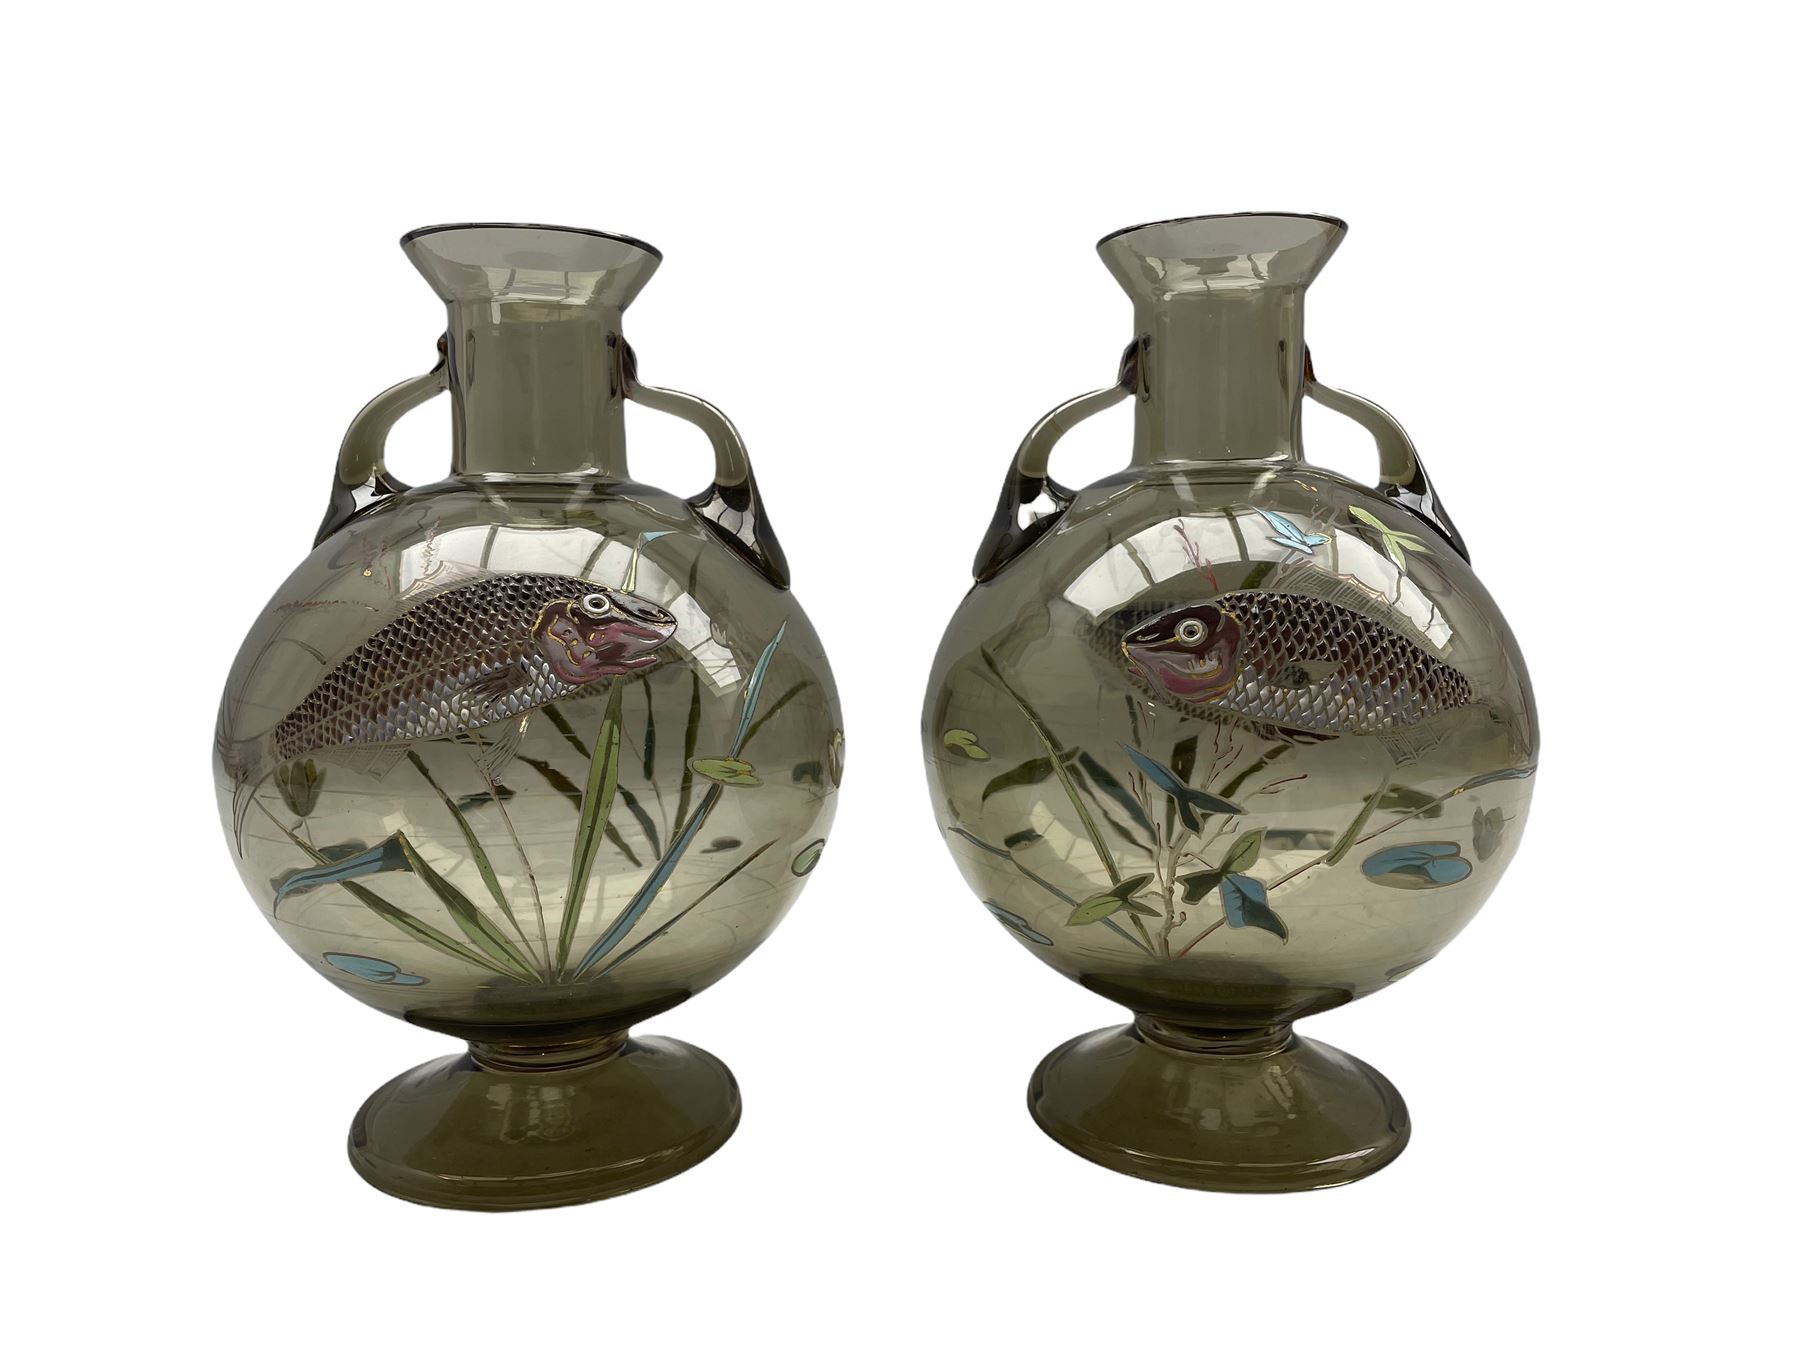 Pair of Bohemian glass vases attributed to Moser c1900 - Image 3 of 4